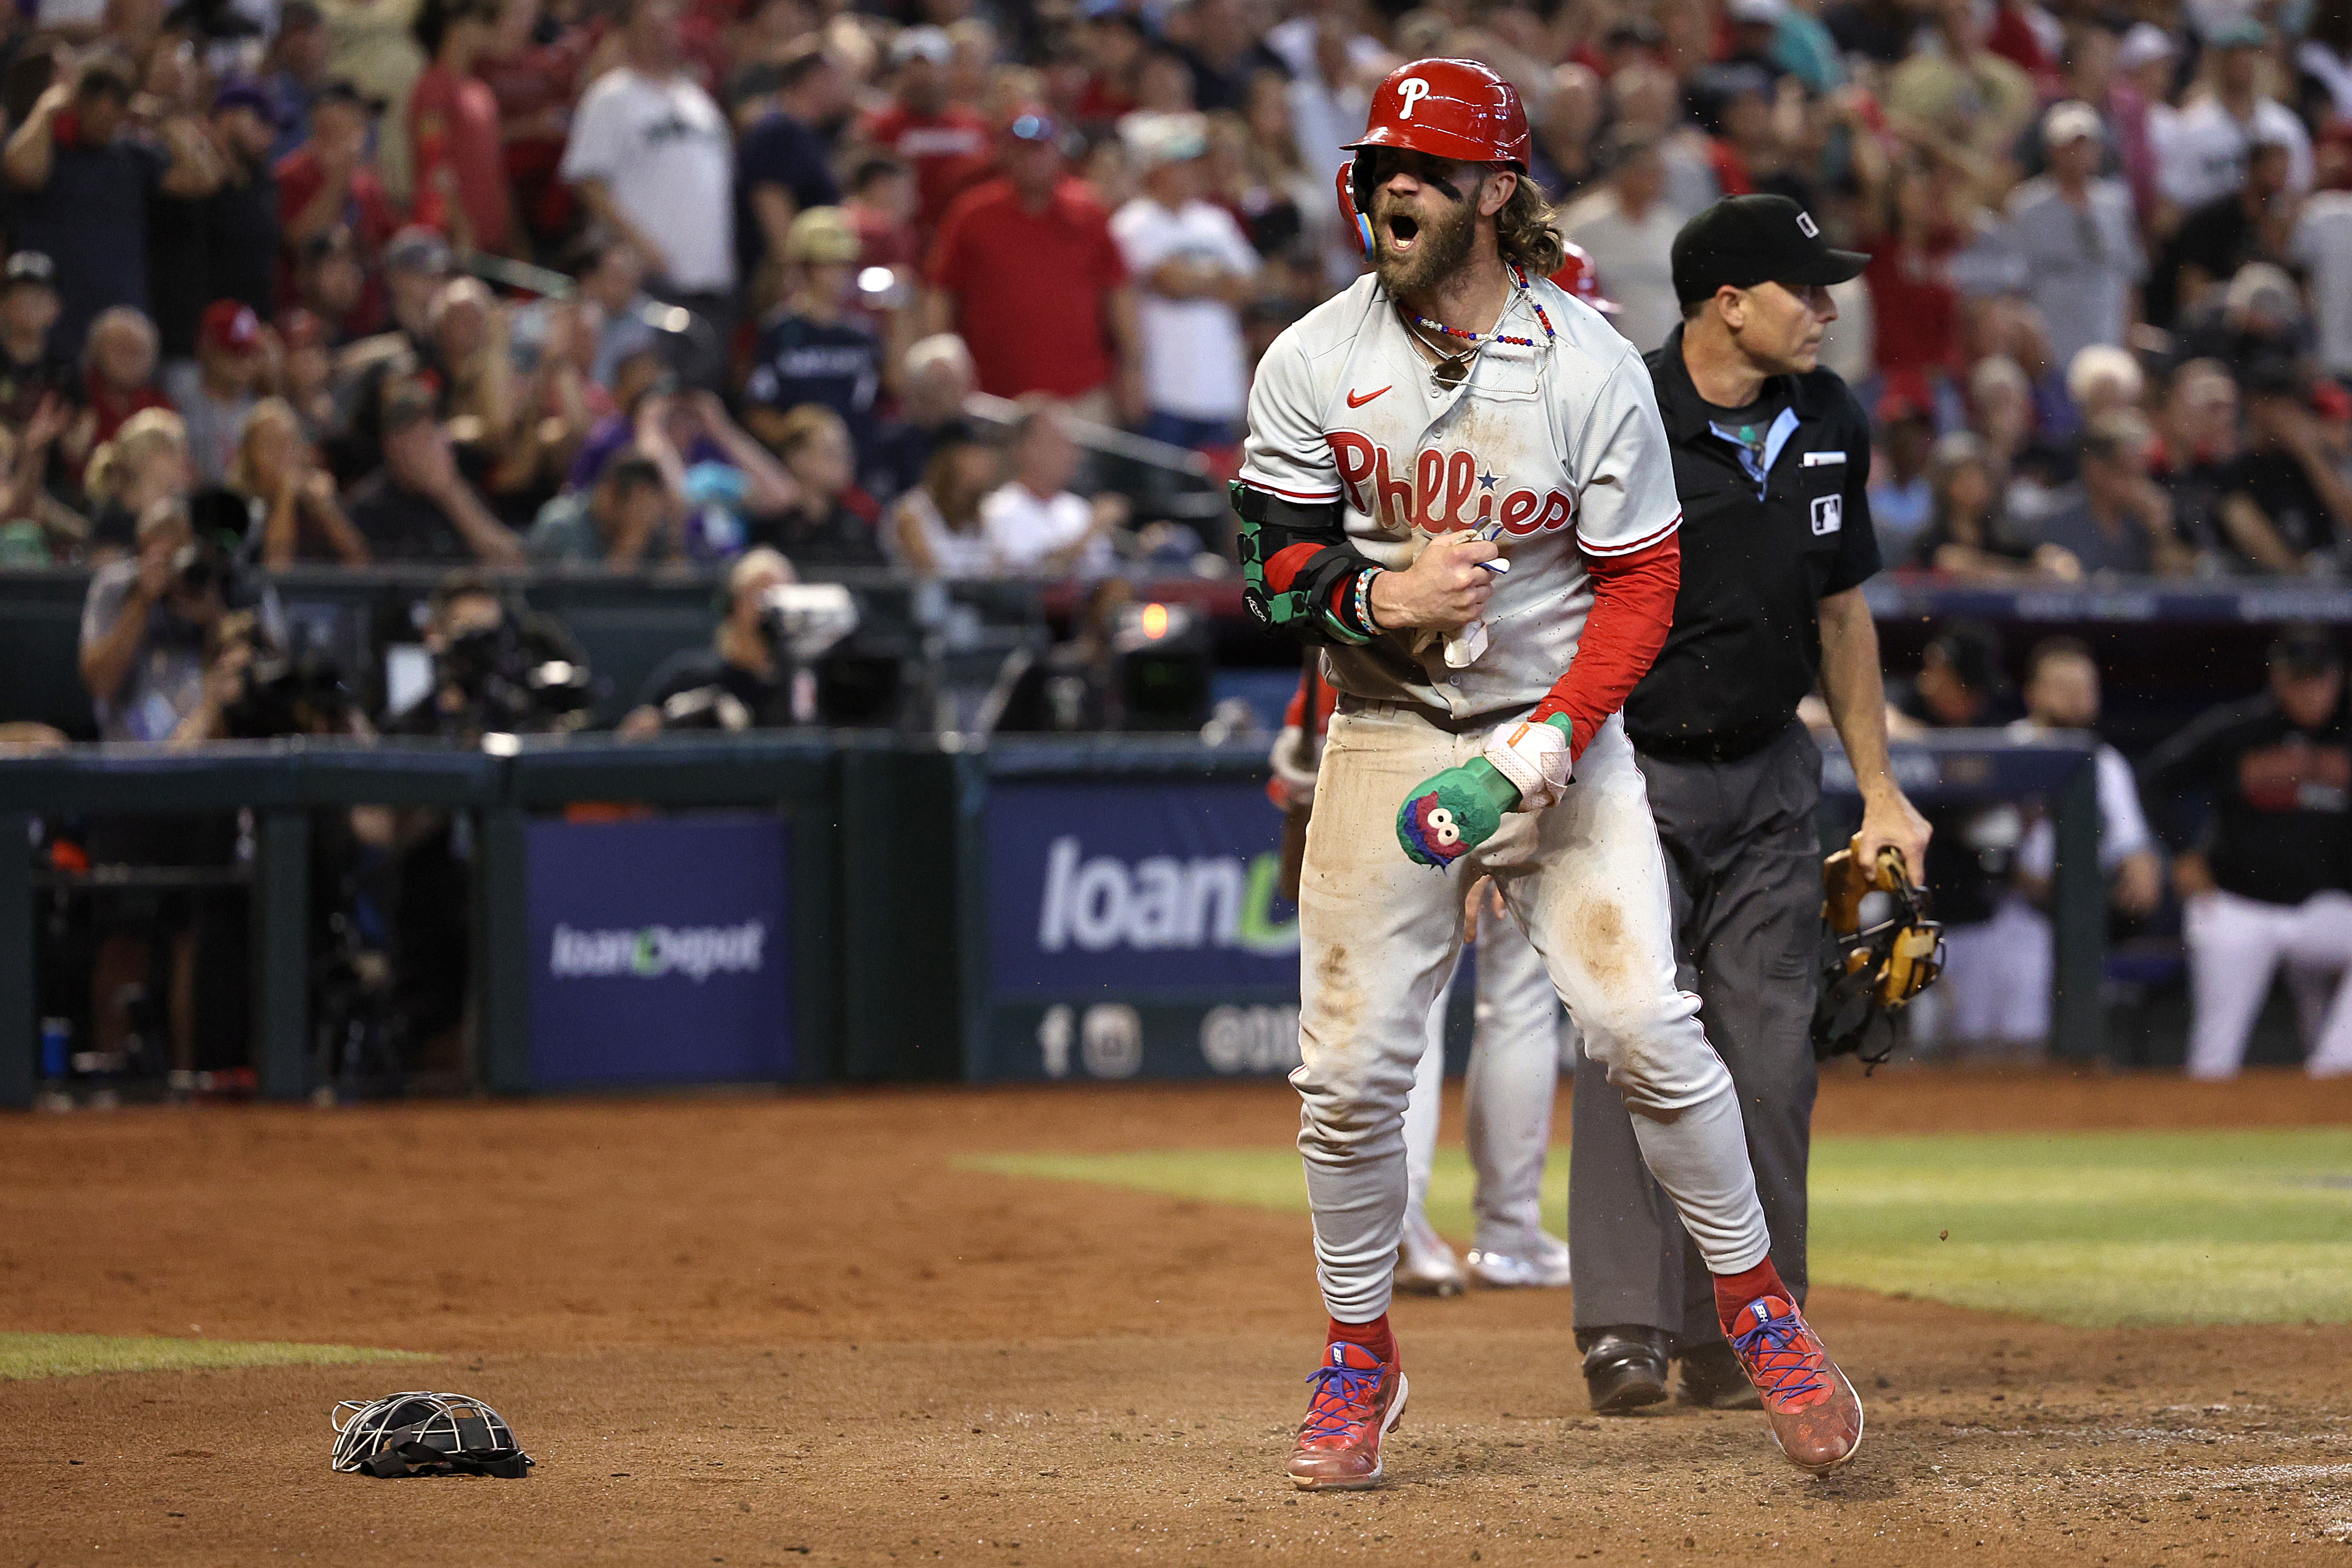 Bryce Harper's walk-off grand slam hands the Cubs a crushing 7-5